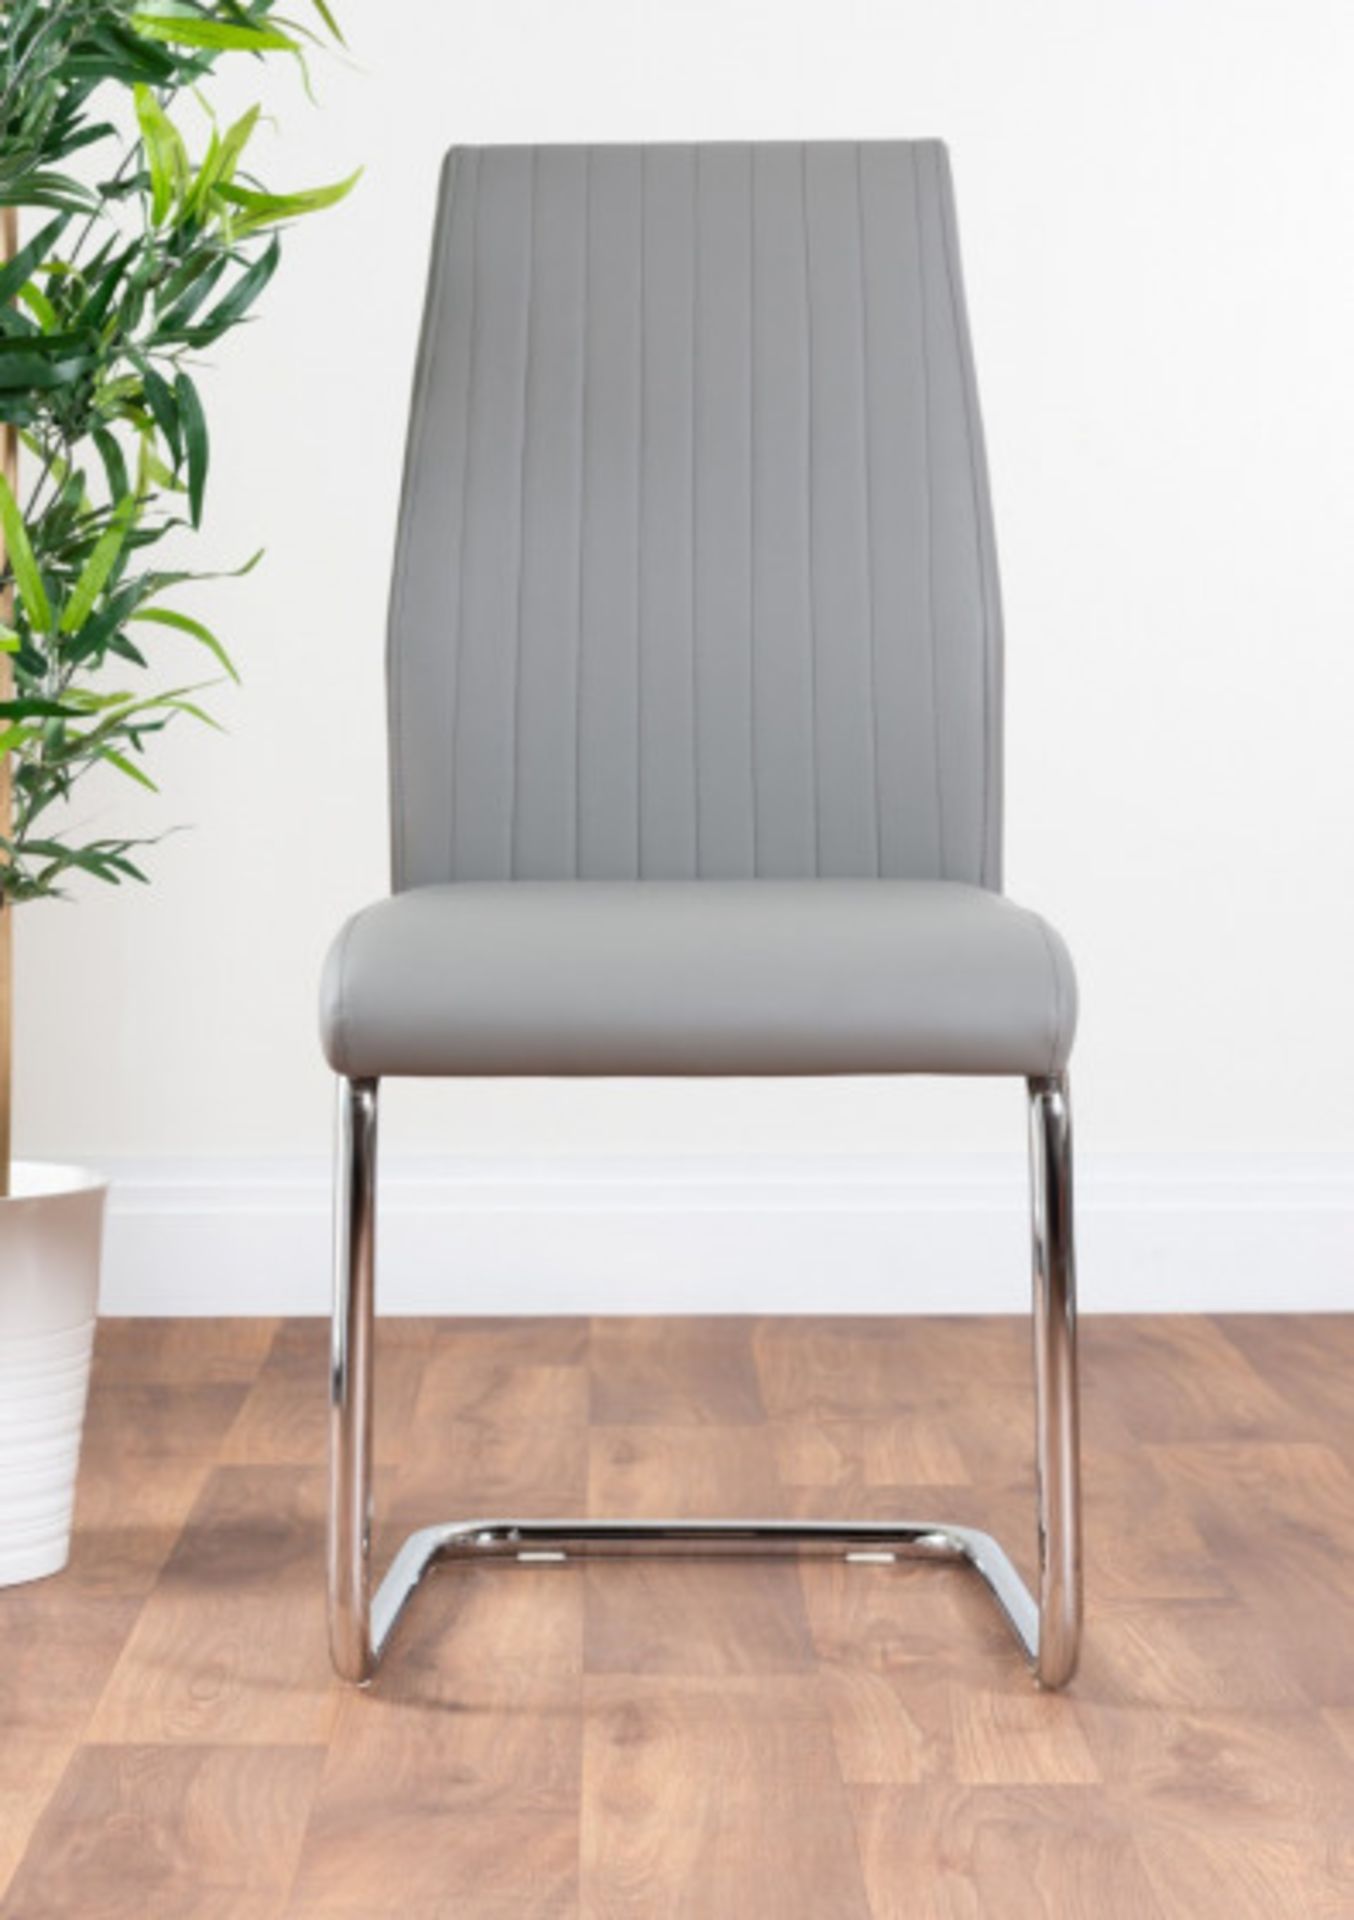 2x Lorenzo Modern Elephant Grey Faux Leather Chrome Dining Chairs - RRP £119.99. - Image 2 of 4